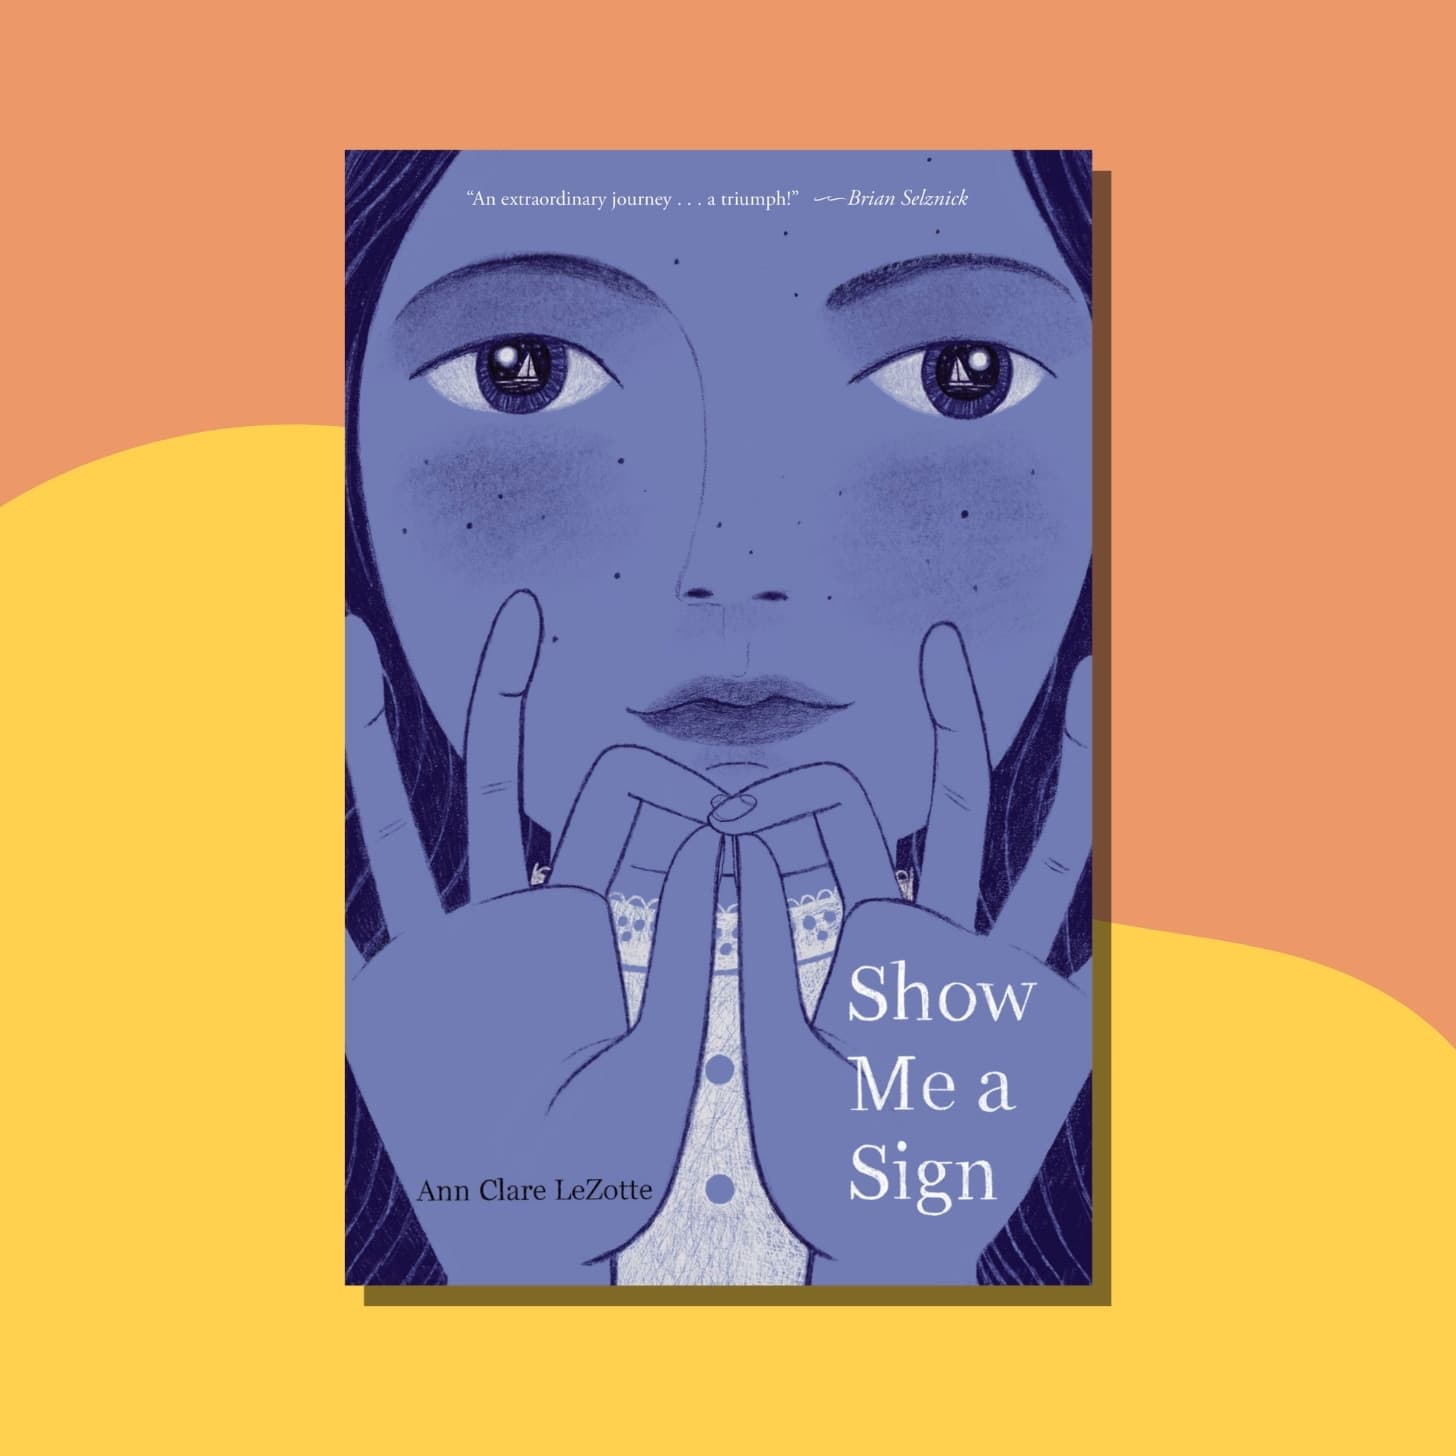 “Show Me a Sign” by Ann Clare LeZotte - Cover has a closeup view of a woman's face, with sailboats reflected in her eyes, and her hands doing sign language